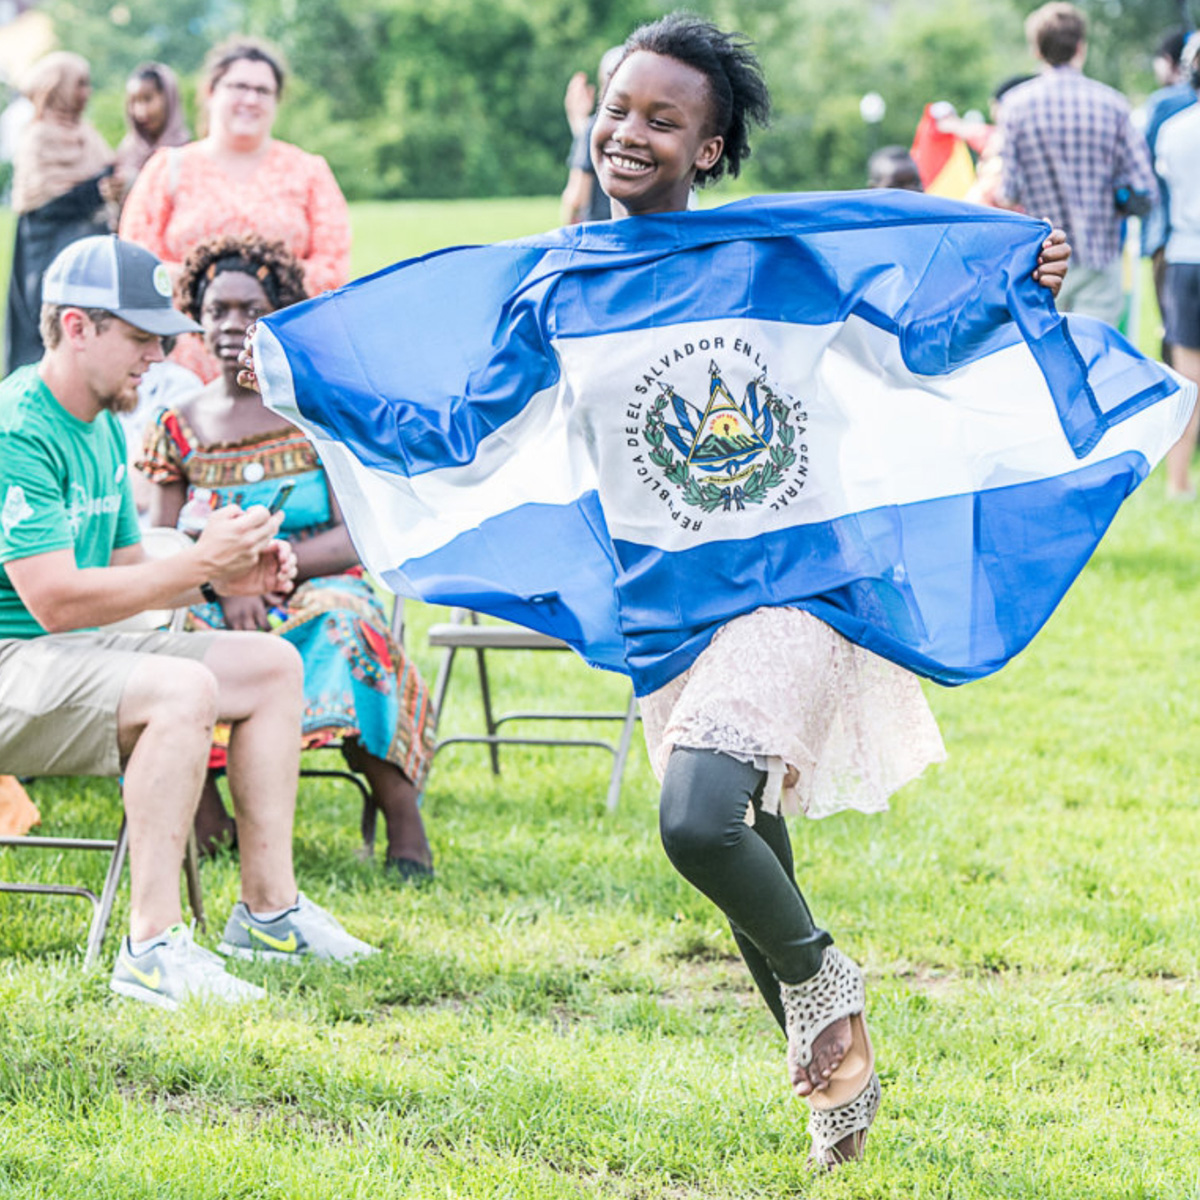 A smiling young girl holds a Republic of El Salvador flag as she runs in front of onlookers at a community celebration in Lewiston, Maine.